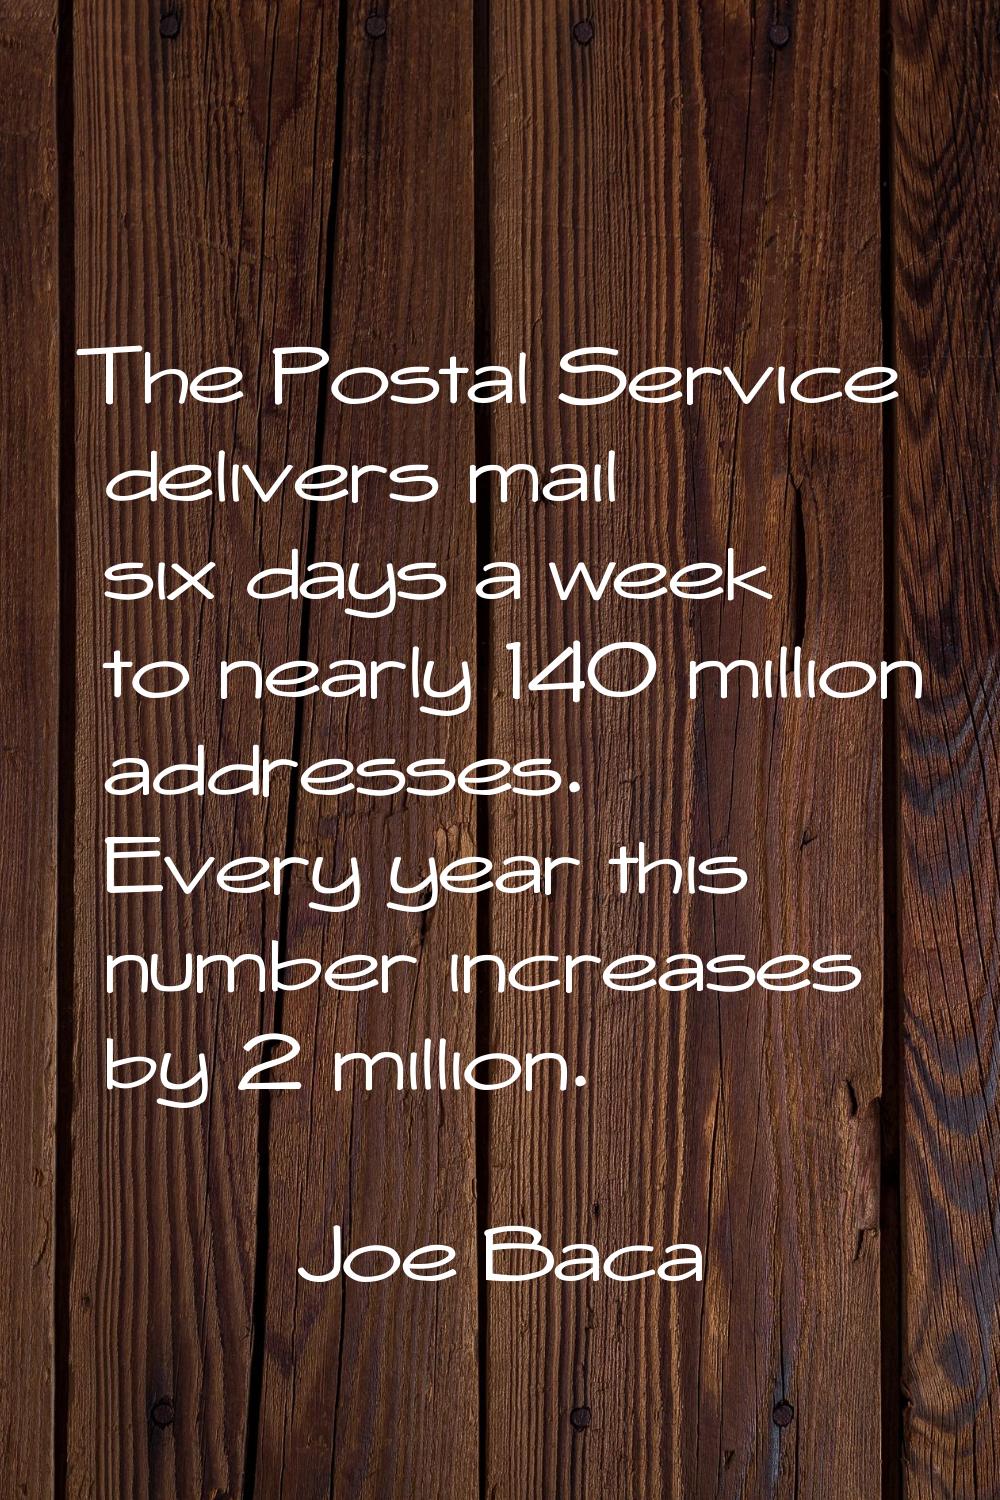 The Postal Service delivers mail six days a week to nearly 140 million addresses. Every year this n